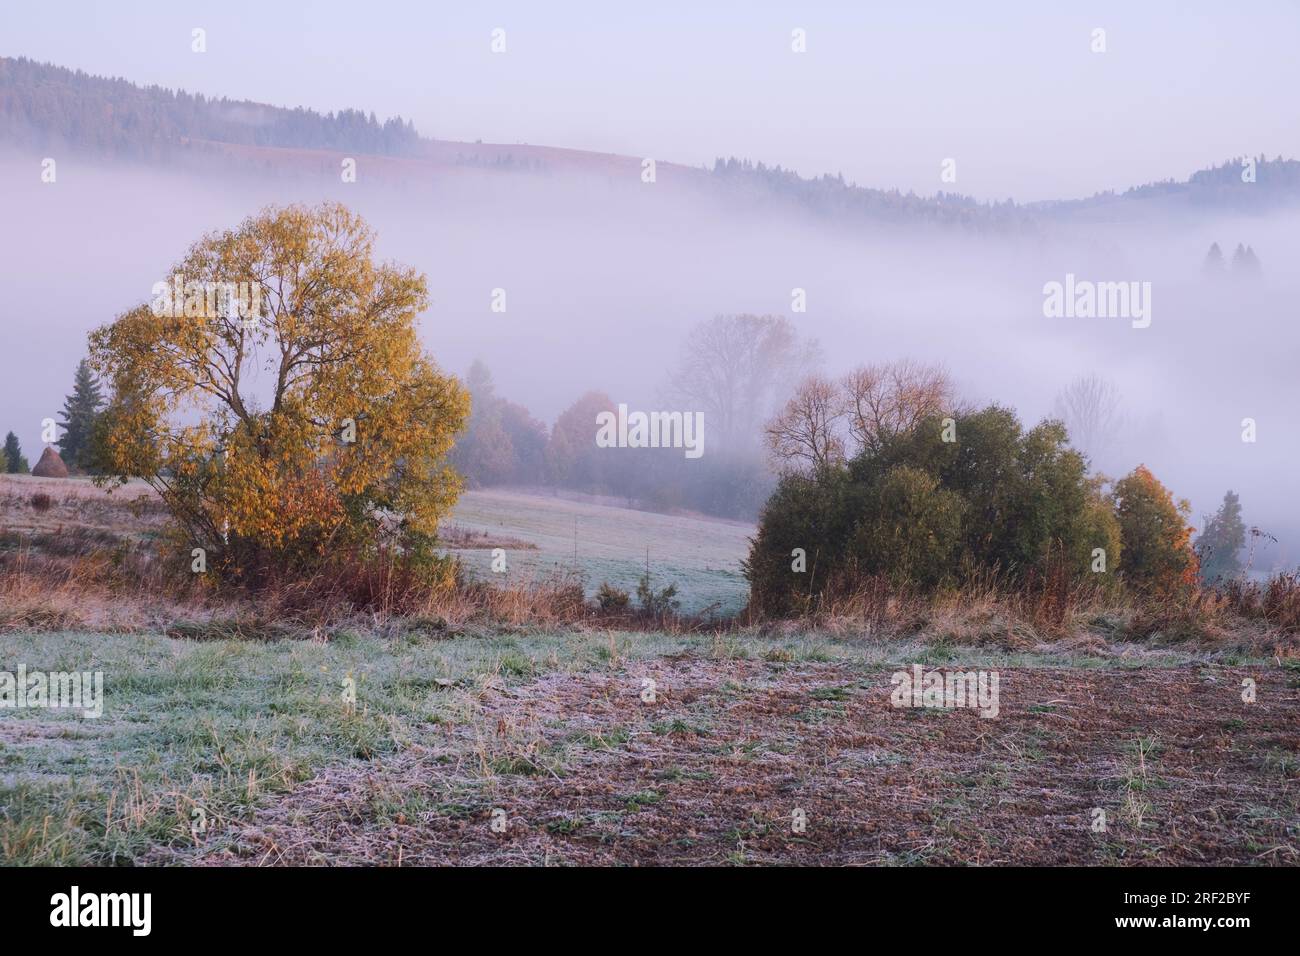 Misty landscape with mountain forest. Panorama view of mountain before sunrise Stock Photo